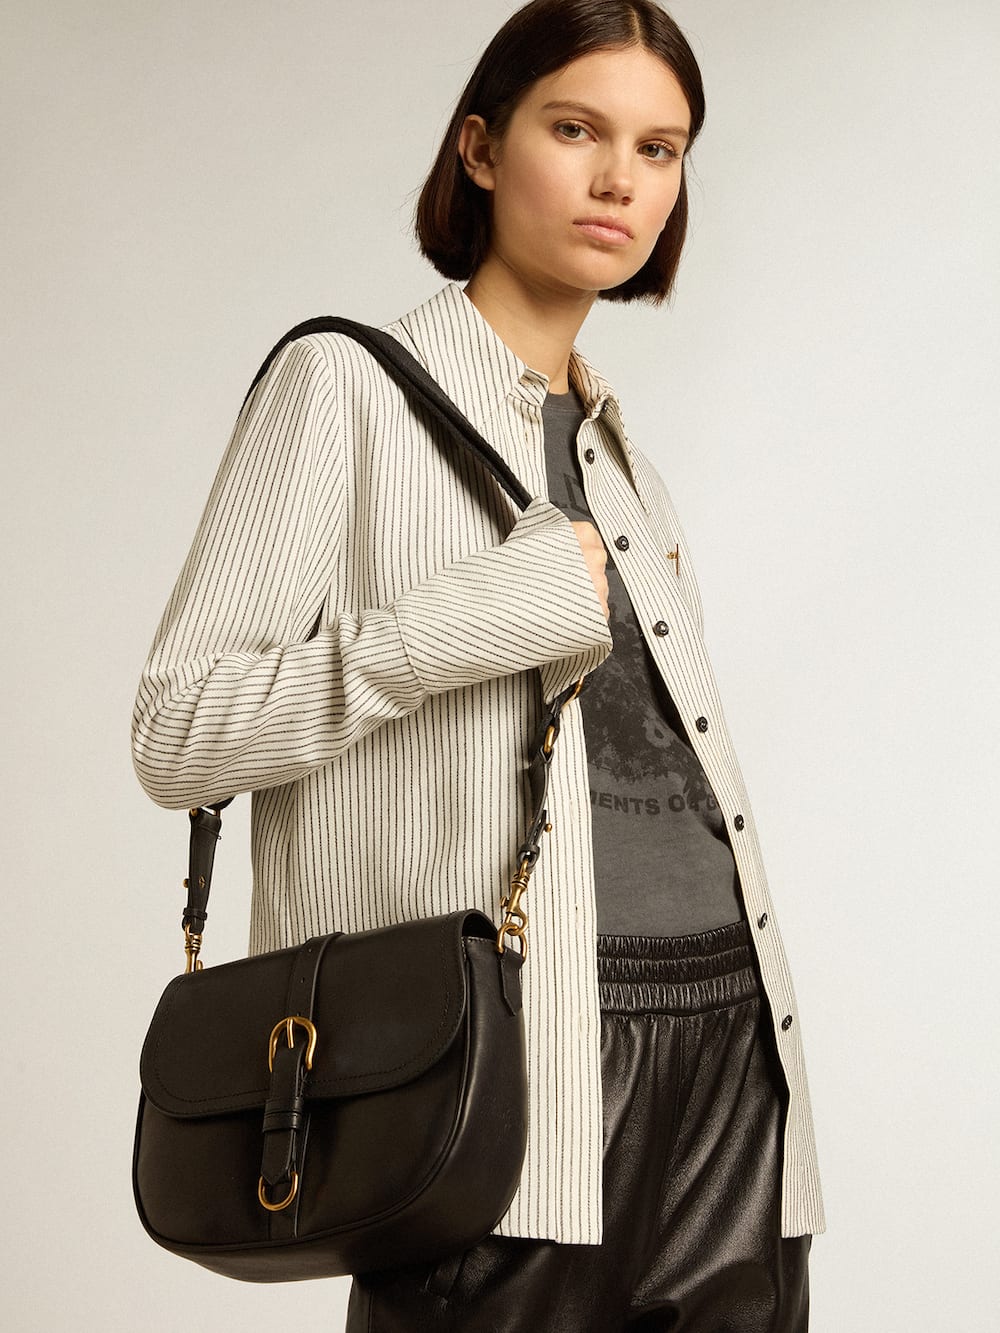 Golden Goose - Medium Sally Bag in black leather with buckle and shoulder strap  in 